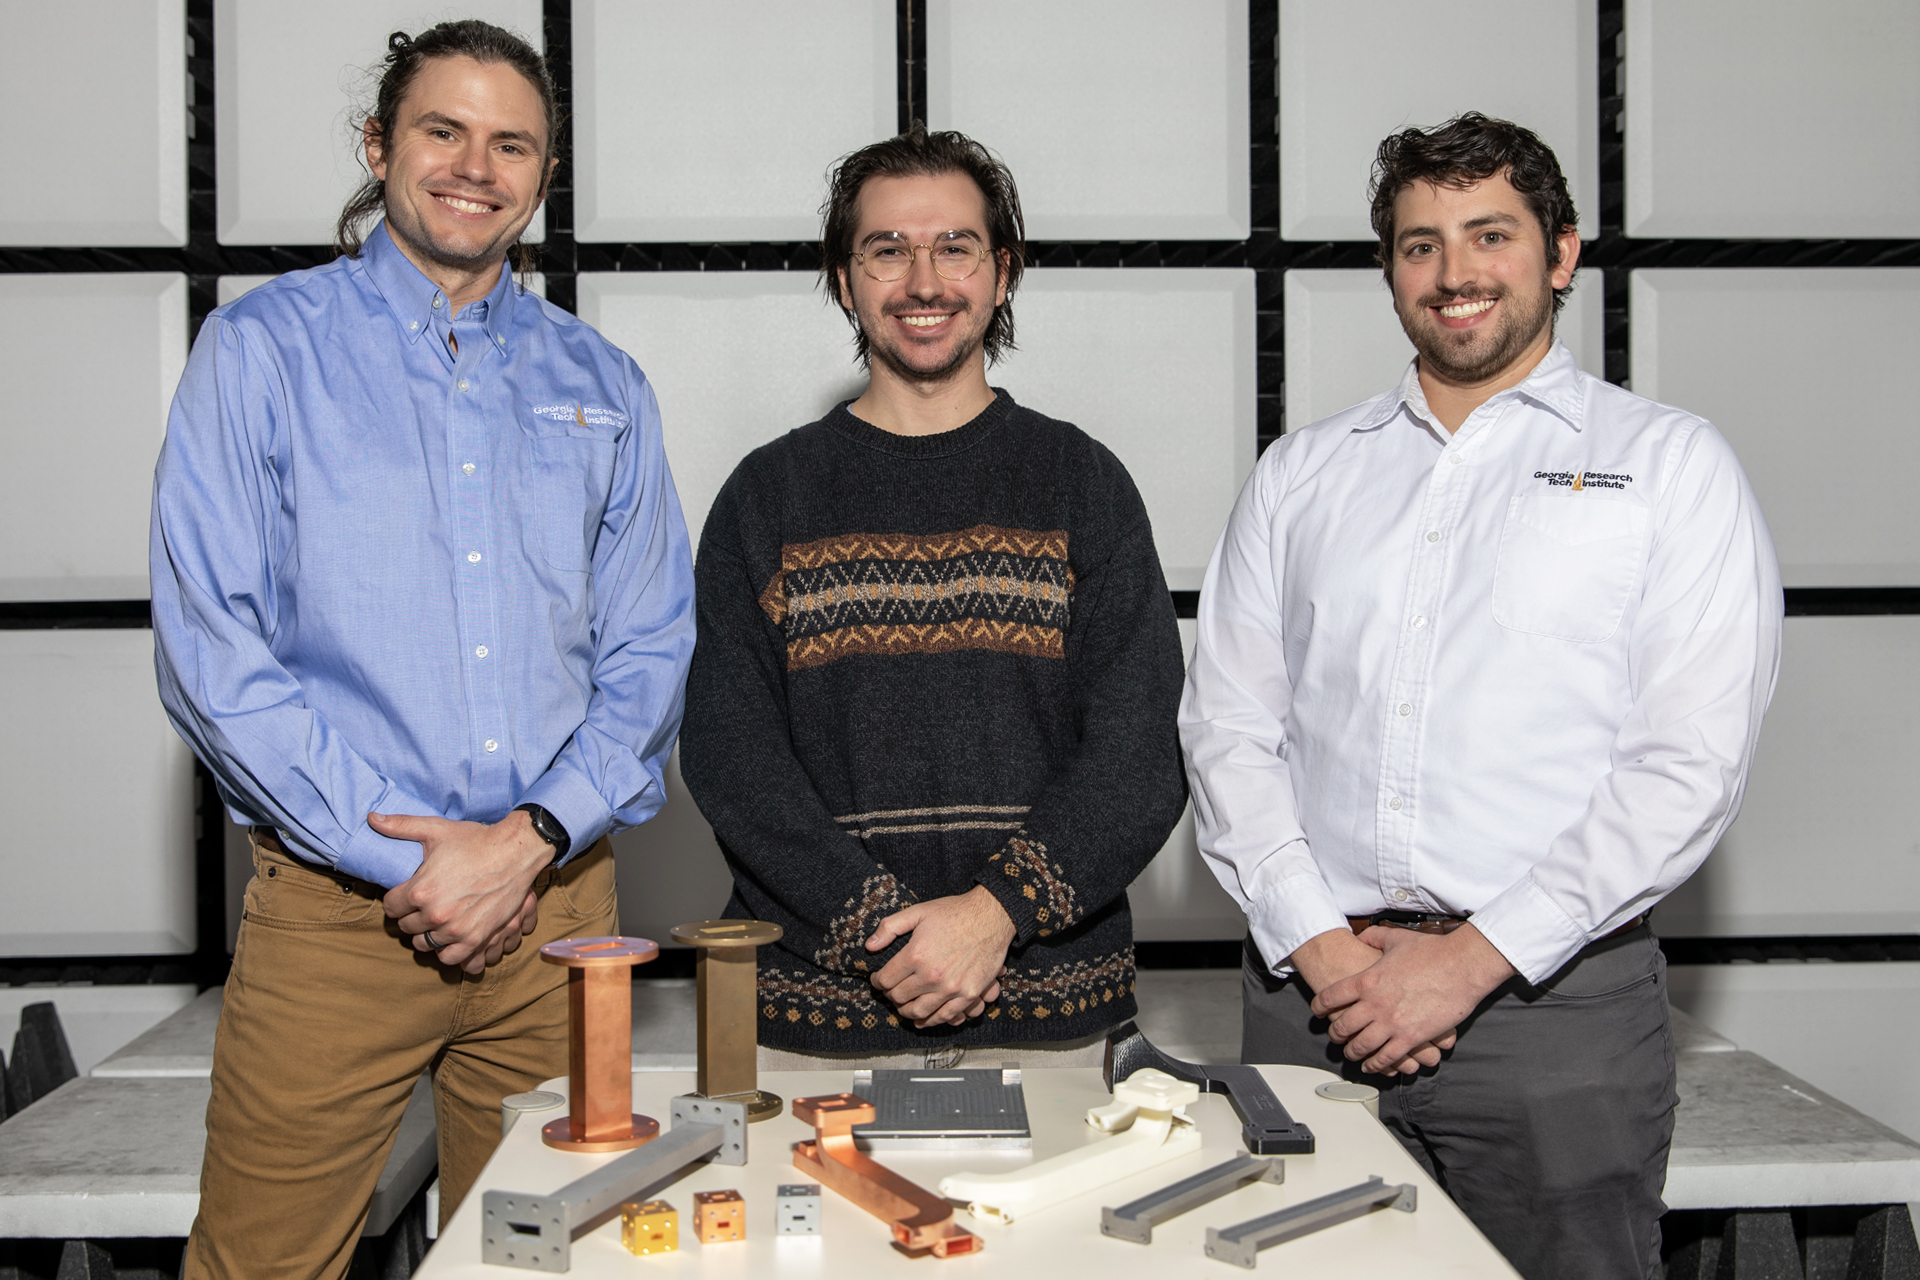 Three male researchers pose behind small table containing various 3D printed components